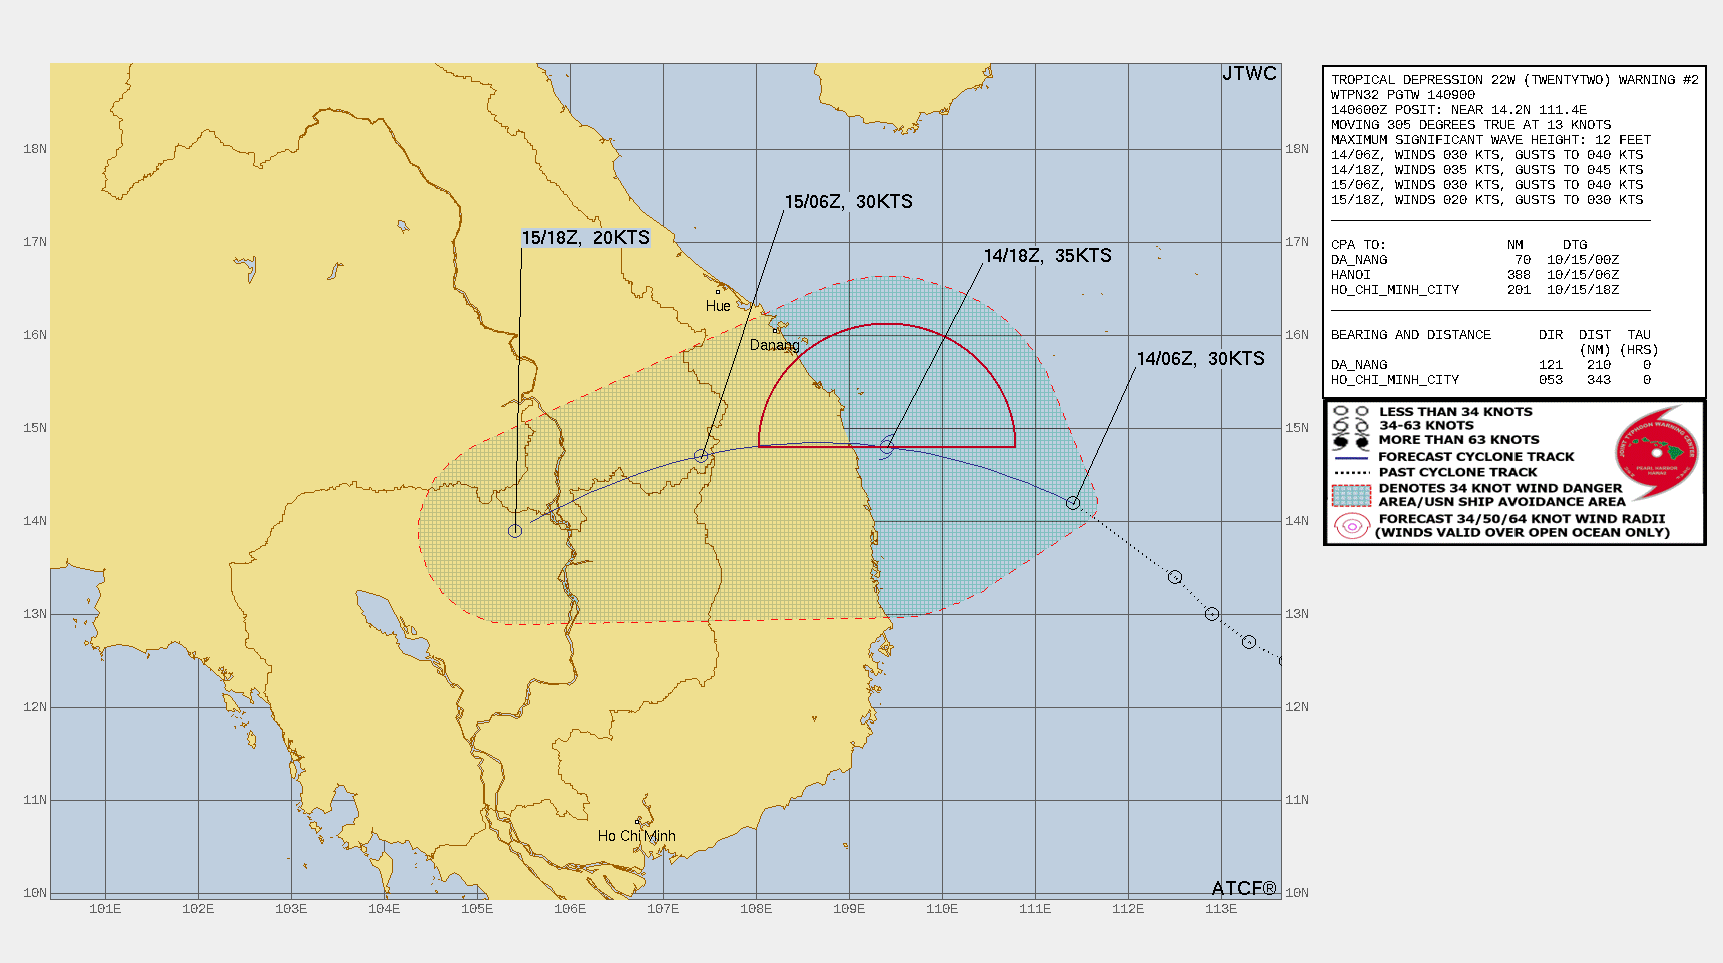 FORECAST REASONING.  SIGNIFICANT FORECAST CHANGES: THERE ARE NO SIGNIFICANT CHANGES TO THE FORECAST FROM THE PREVIOUS WARNING.  FORECAST DISCUSSION: TD 22W IS FORECAST TO TRACK WEST-NORTHWESTWARD TO WESTWARD THROUGH TAU 12 WITH LANDFALL OCCURRING JUST AFTER TAU 12. AFTER TAU 12, THE SYSTEM WILL TURN WEST-SOUTHWESTWARD AND WEAKEN RAPIDLY WITH DISSIPATION EXPECTED BY TAU 36.